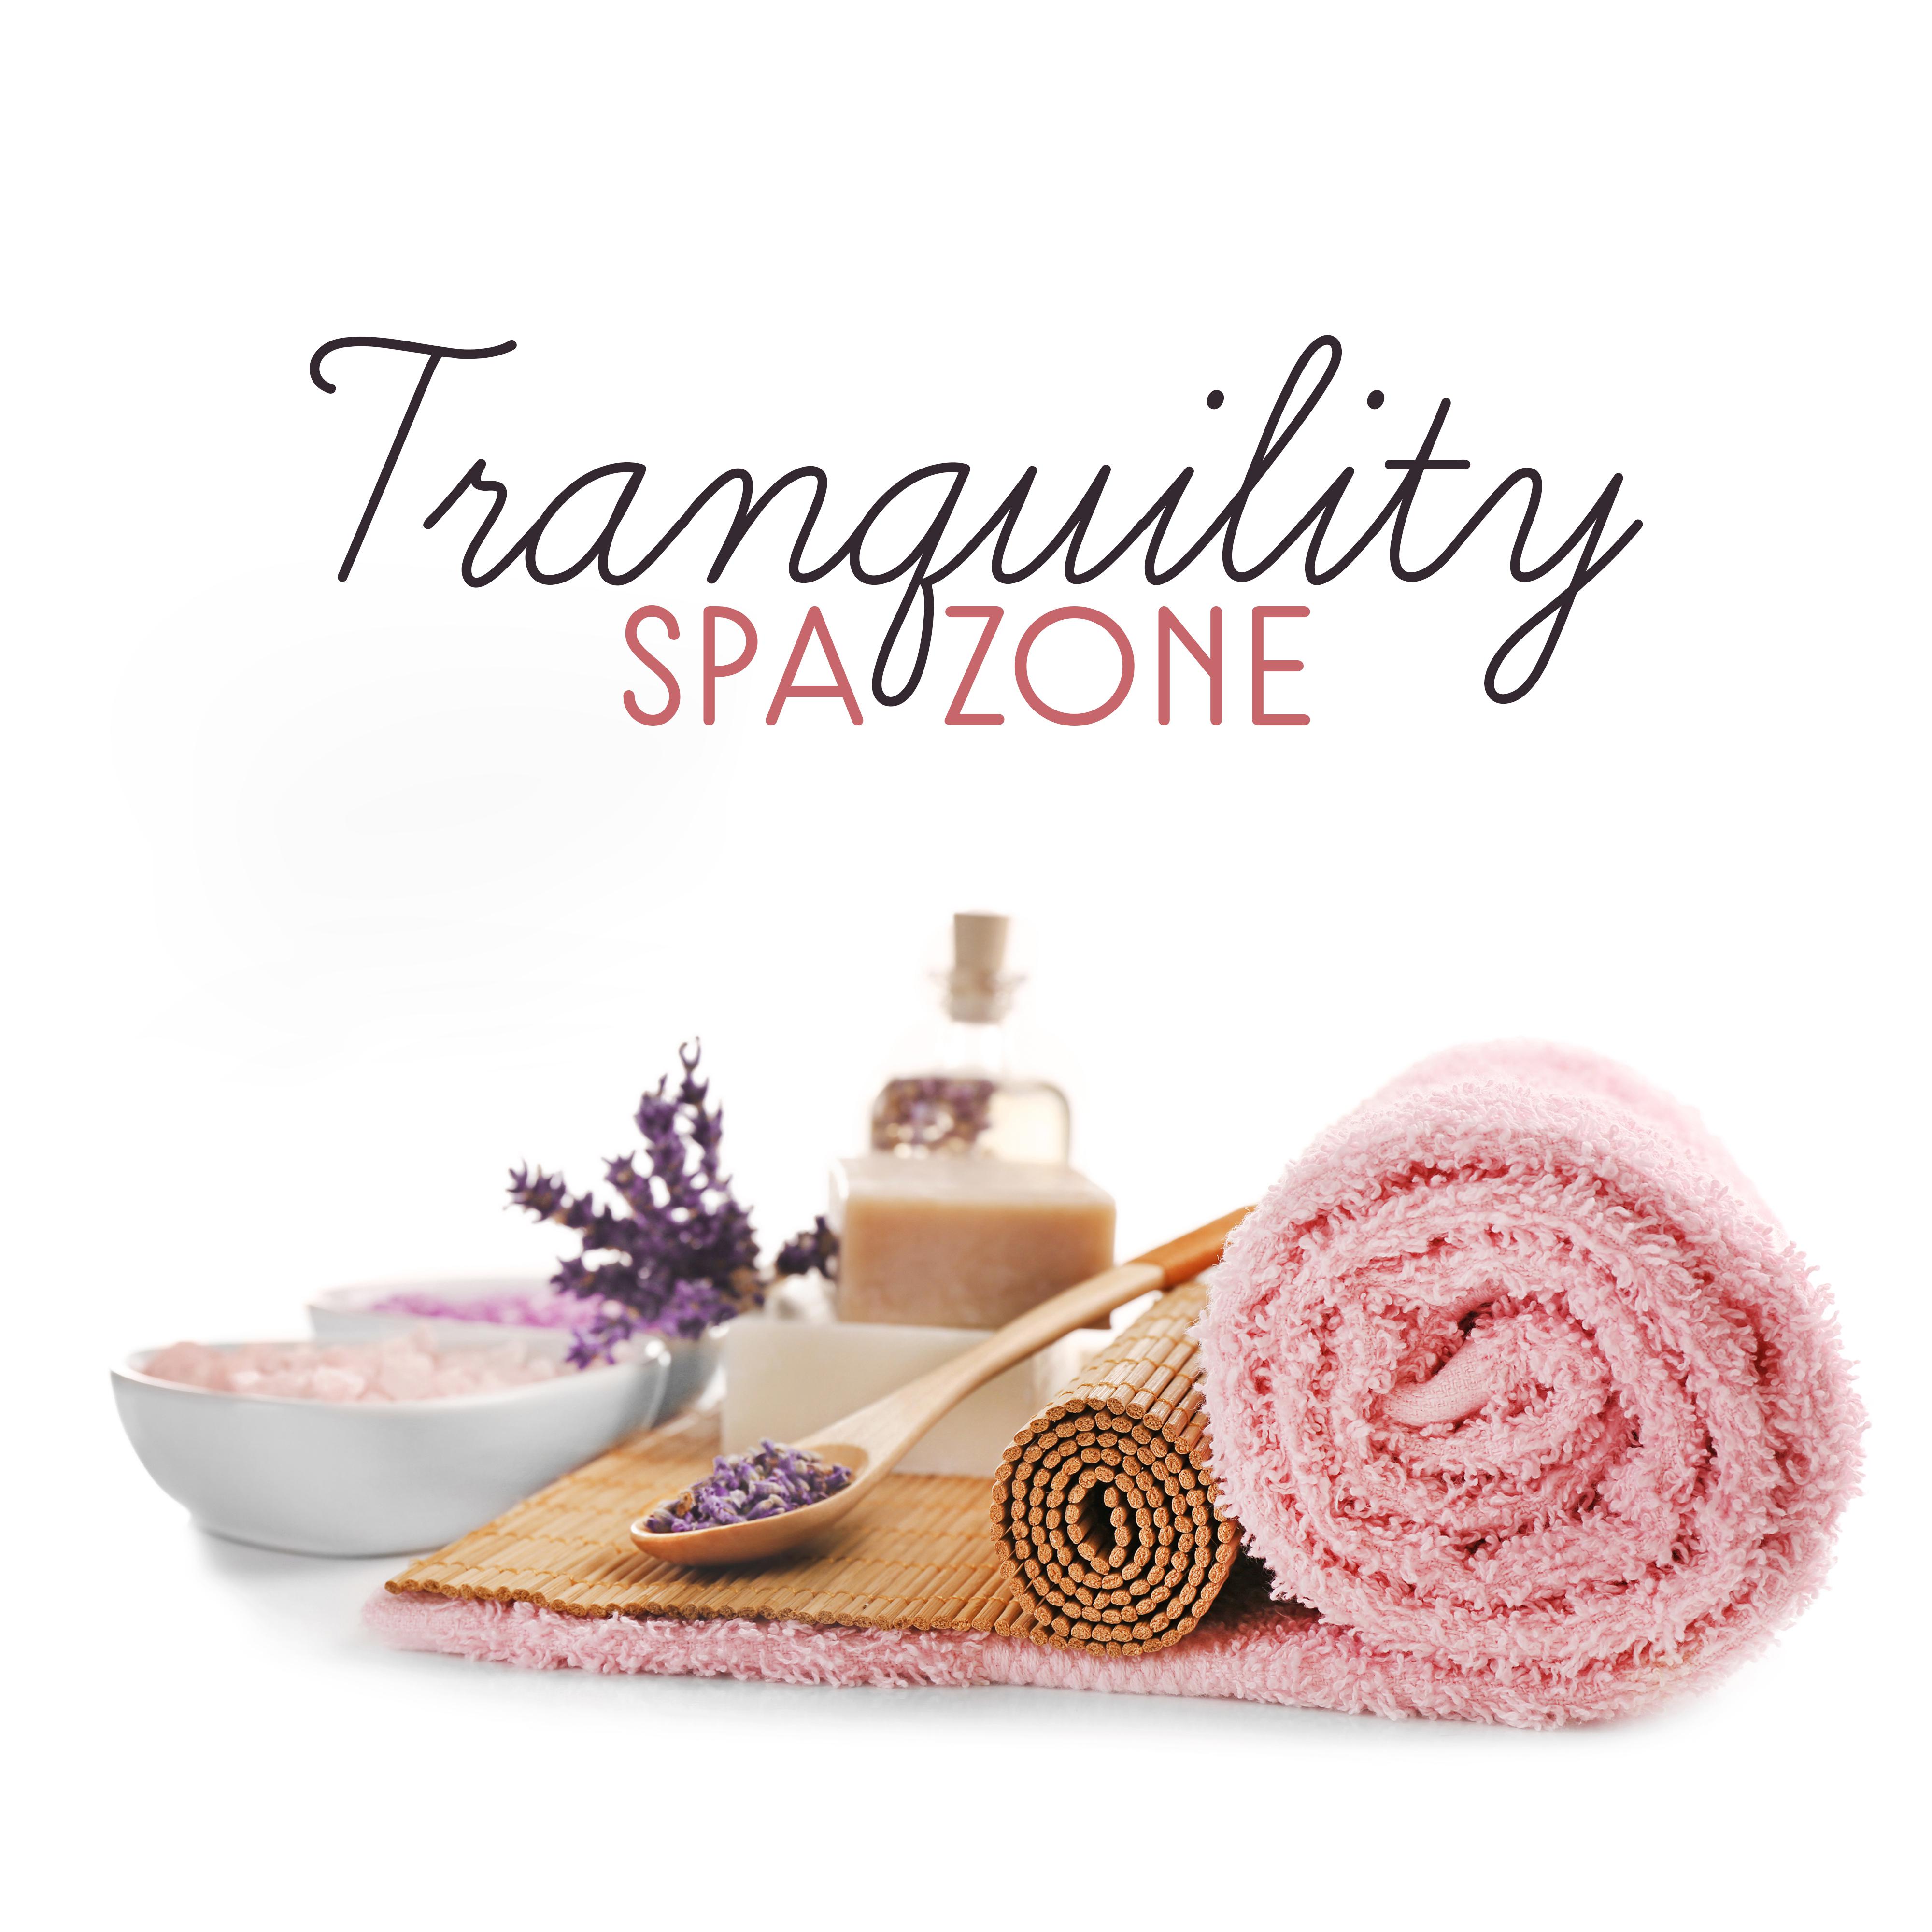 Tranquility Spa Zone